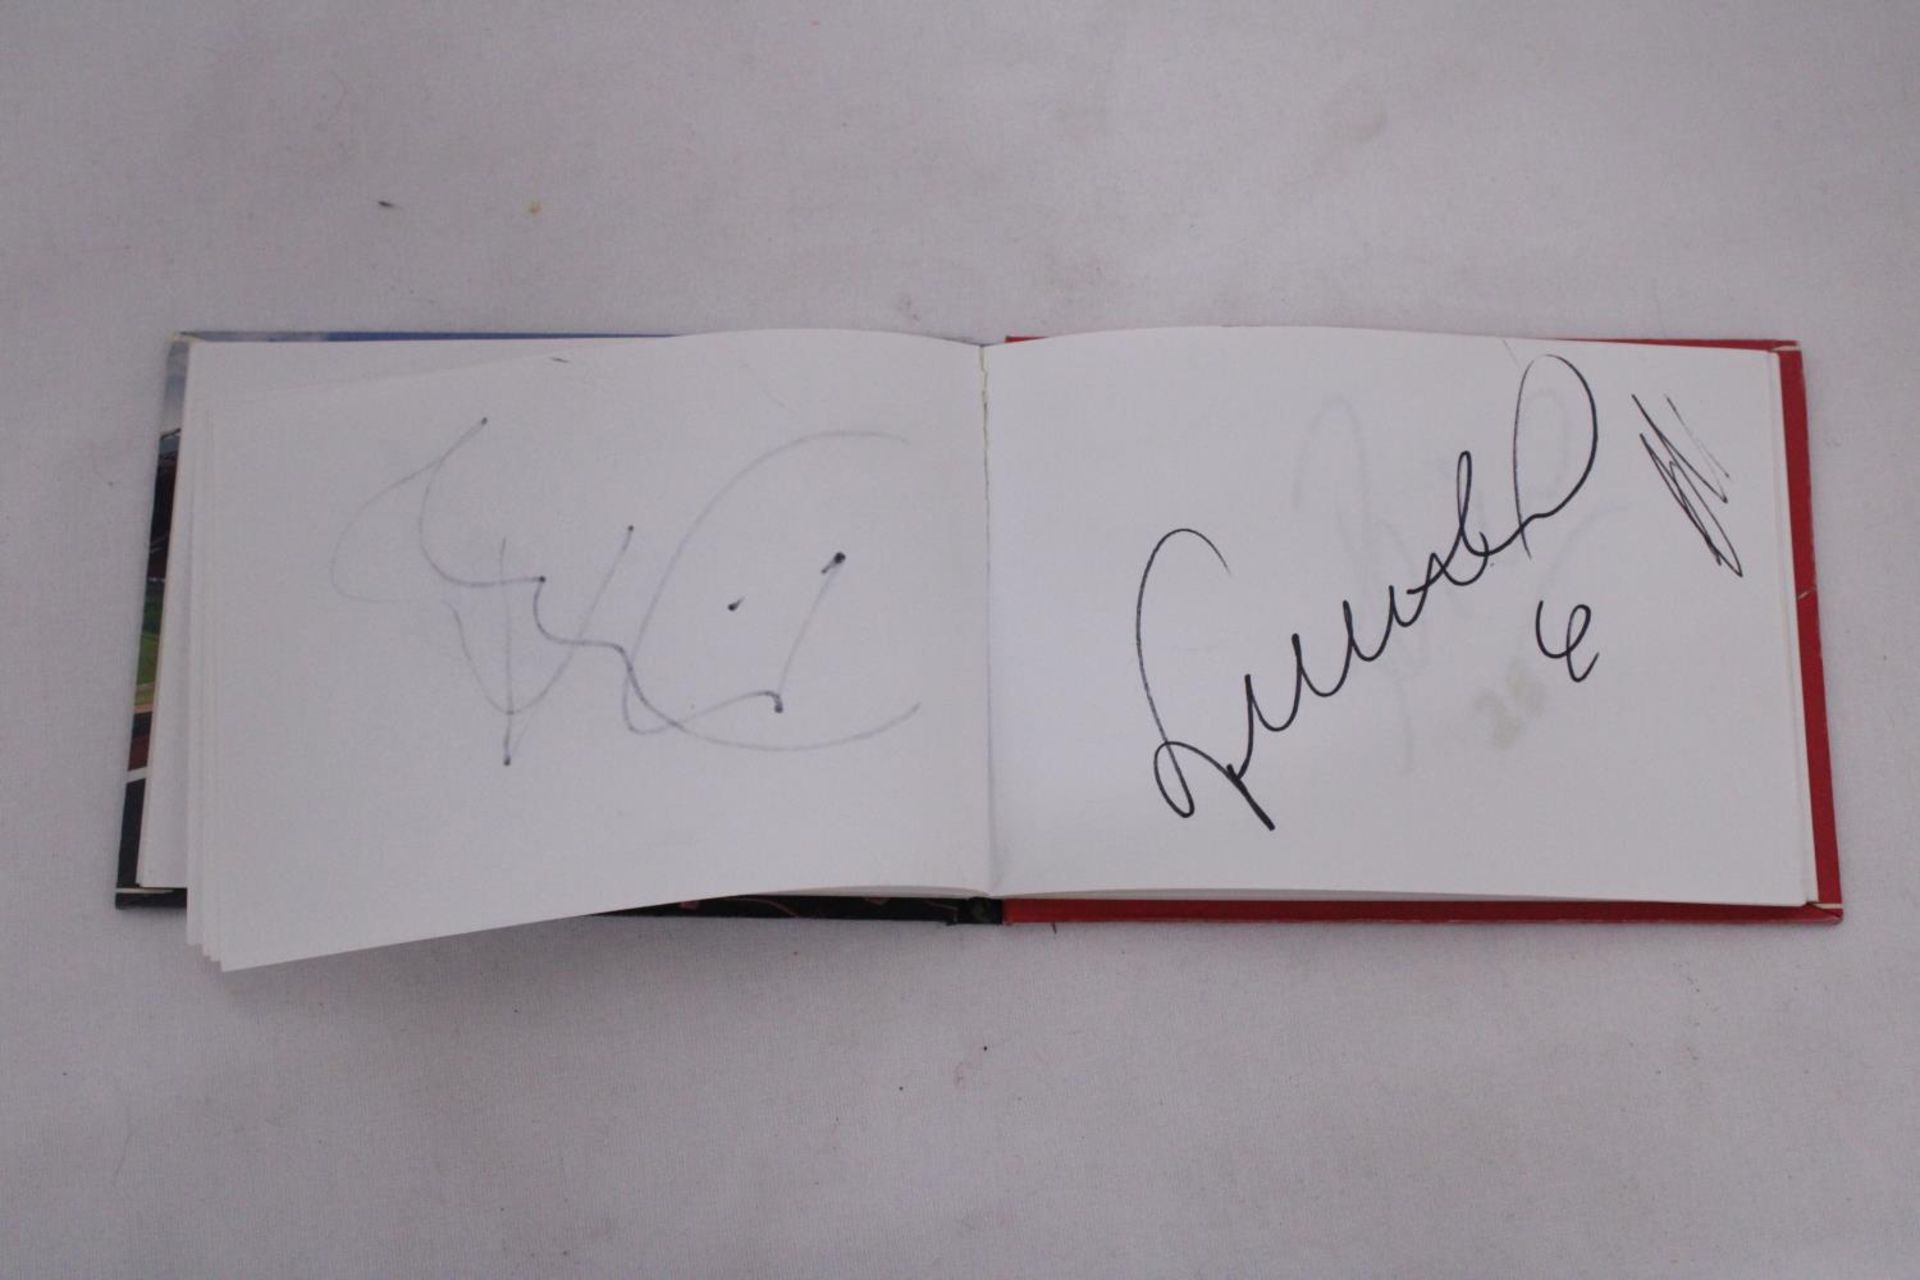 AN AUTOGRAPH BOOK FOR MACCLESFIELD DANCER, CRAIG, WHEN HE DANCED WITH MICHAEL JACKSON ON THE ' - Image 5 of 5